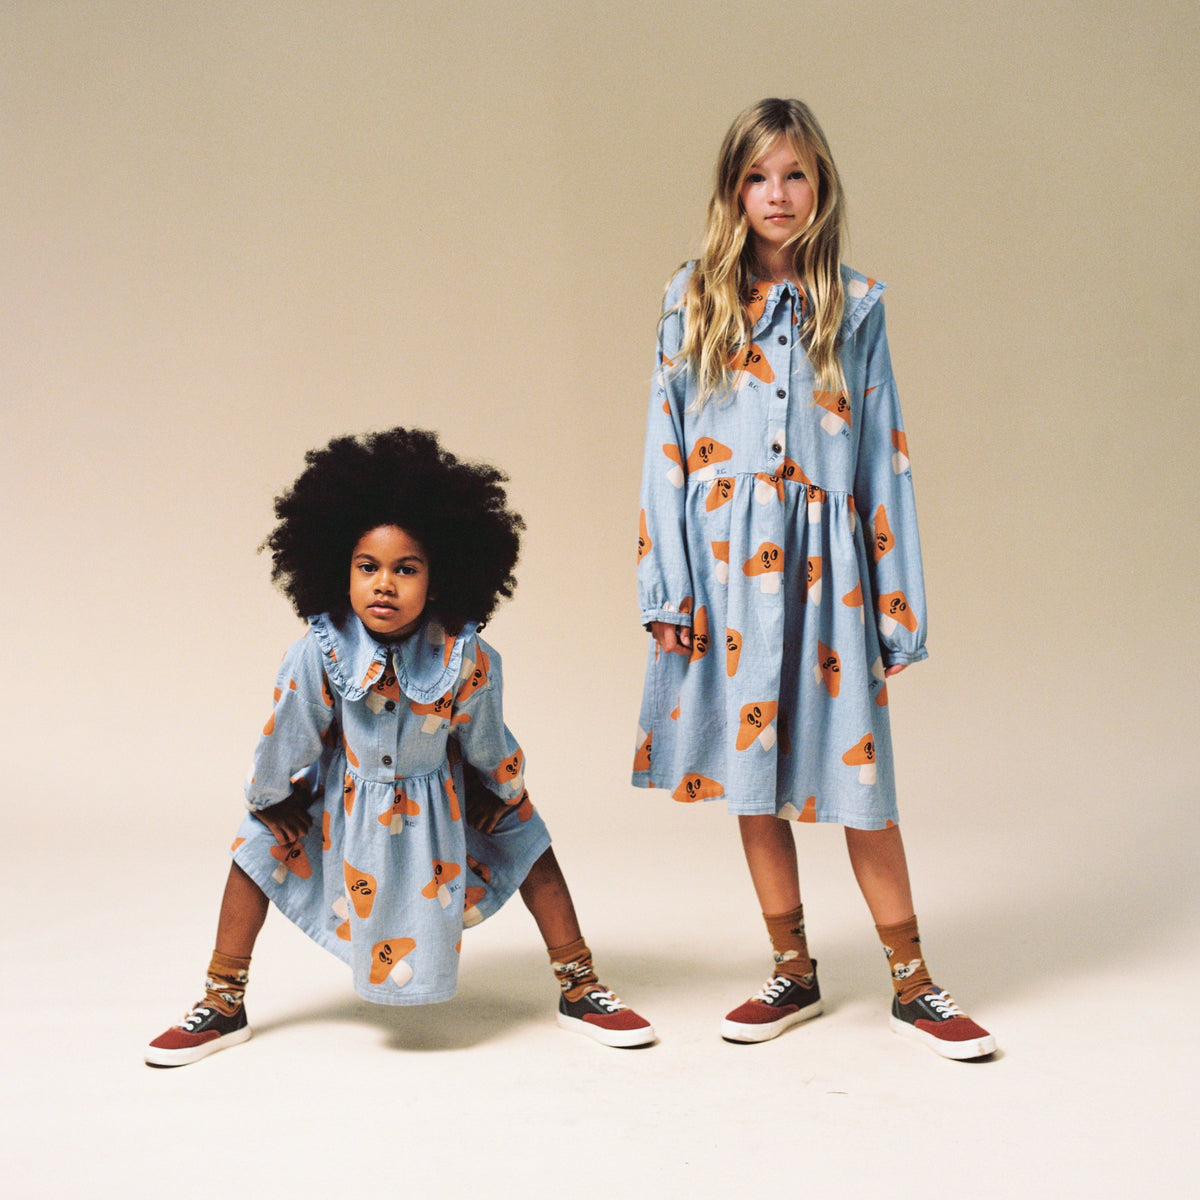 ANDO STORE - Modern baby clothes and children's fashion – Ando